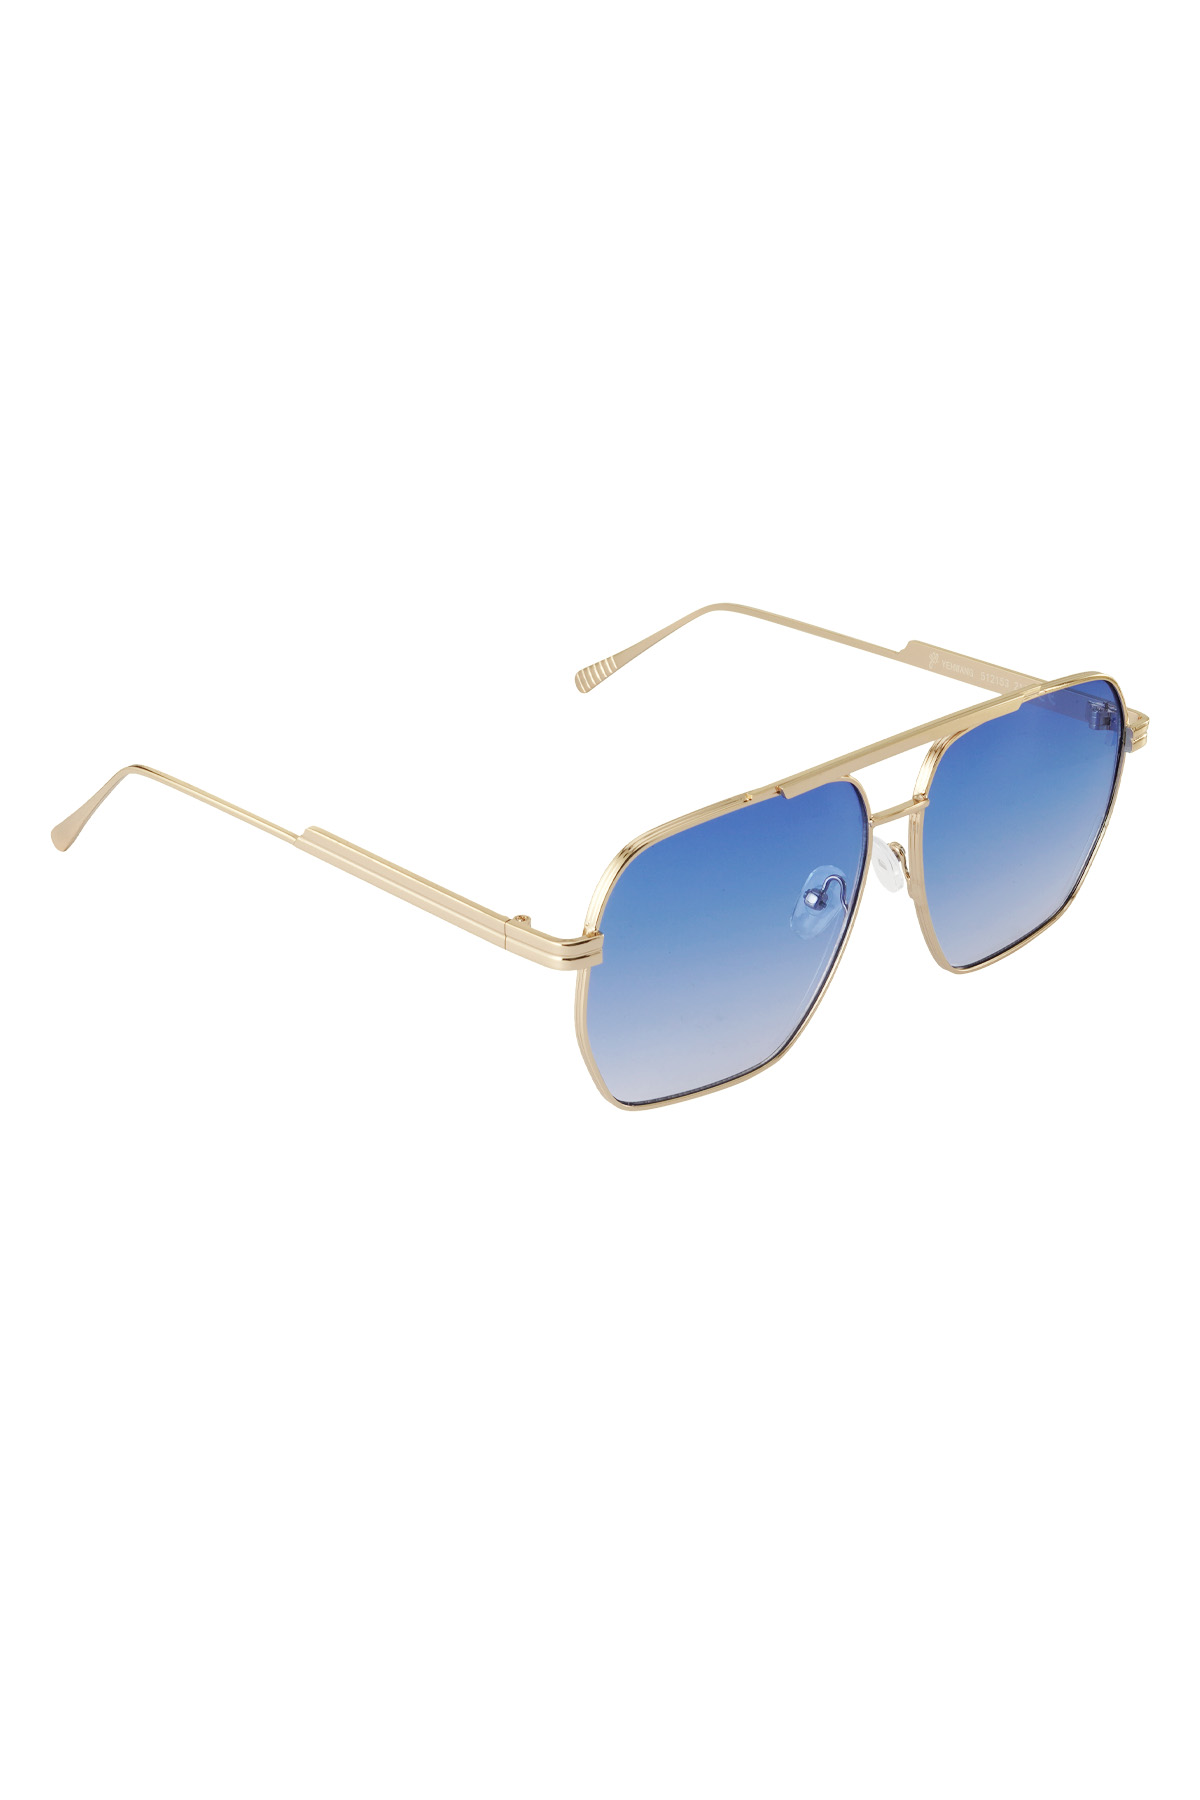 Metal summer sunglasses - Blue and gold